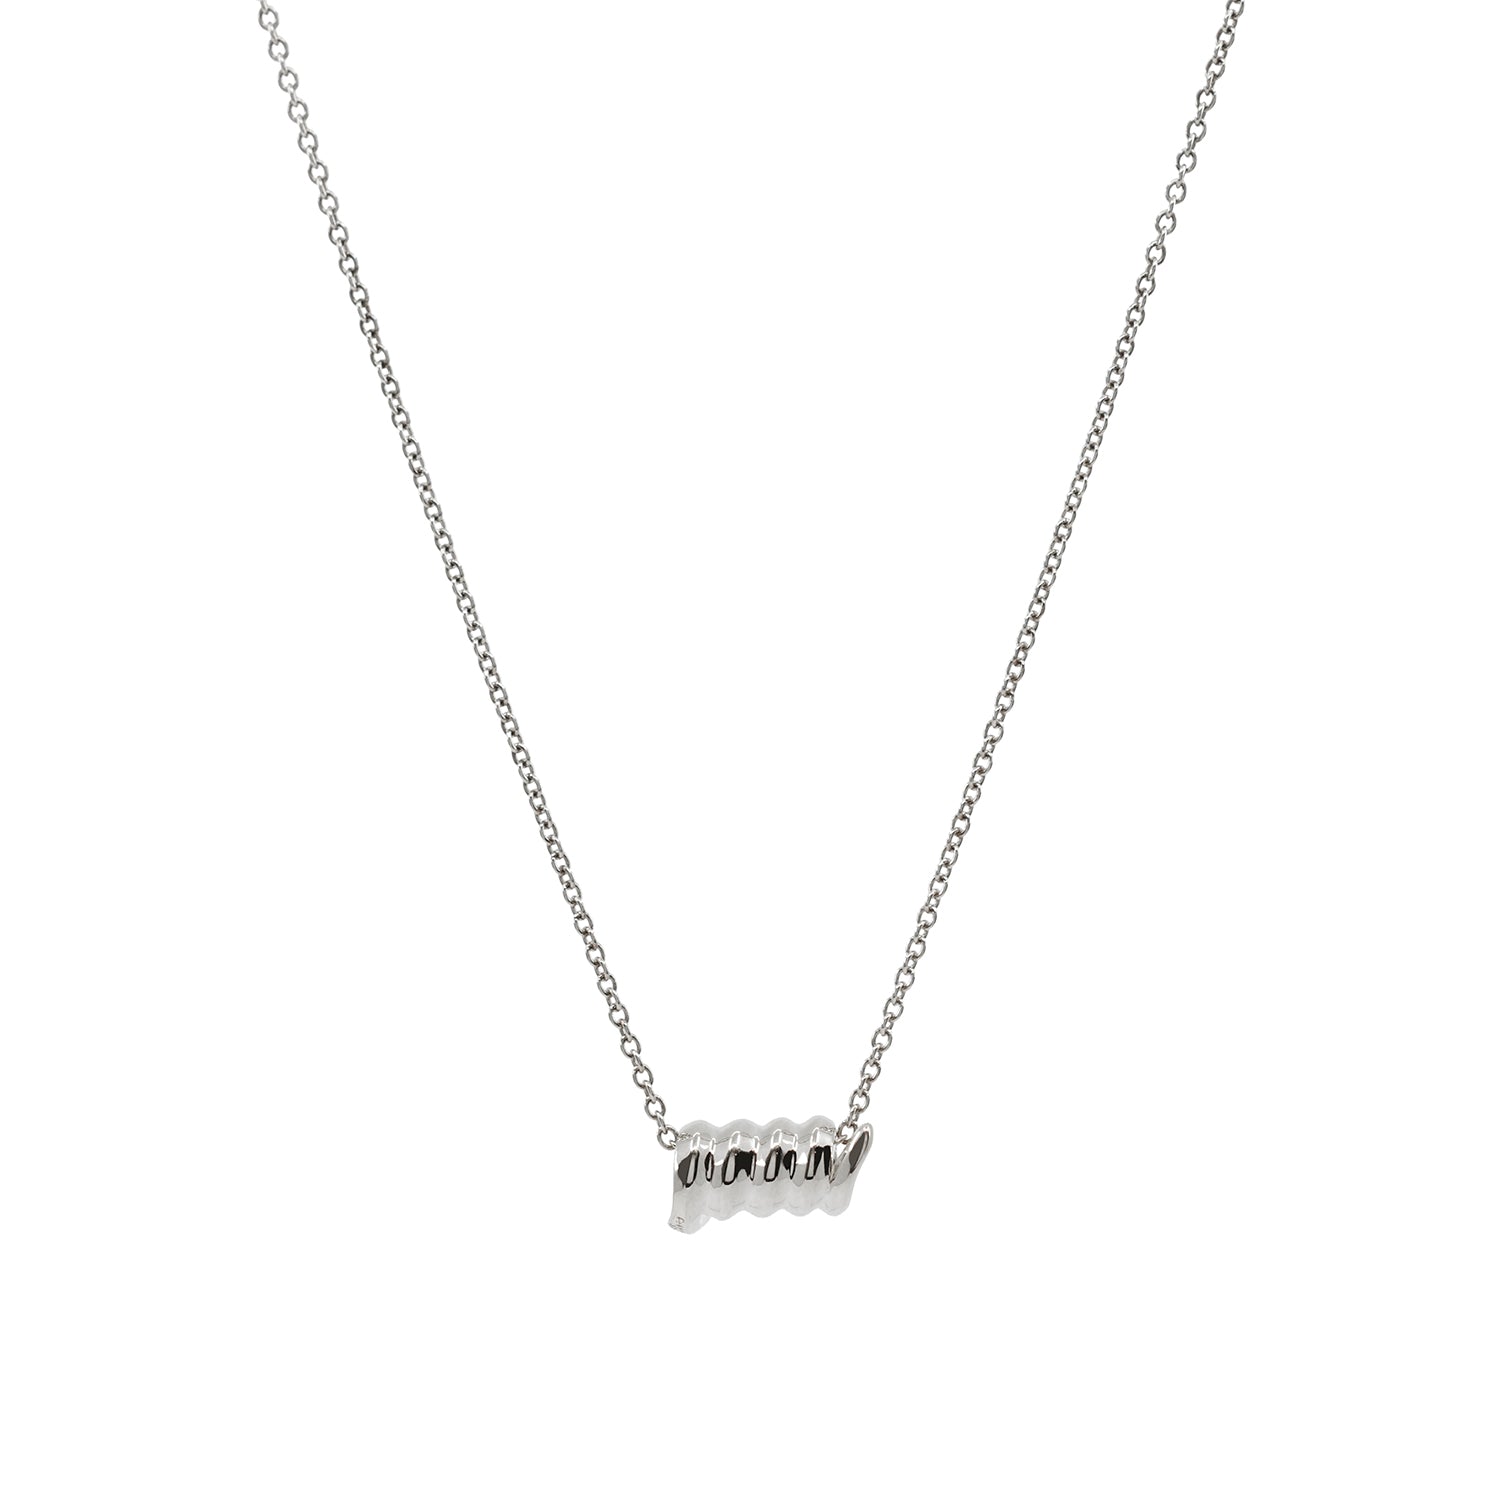 Everyday Strength Necklace - Carrie K. 